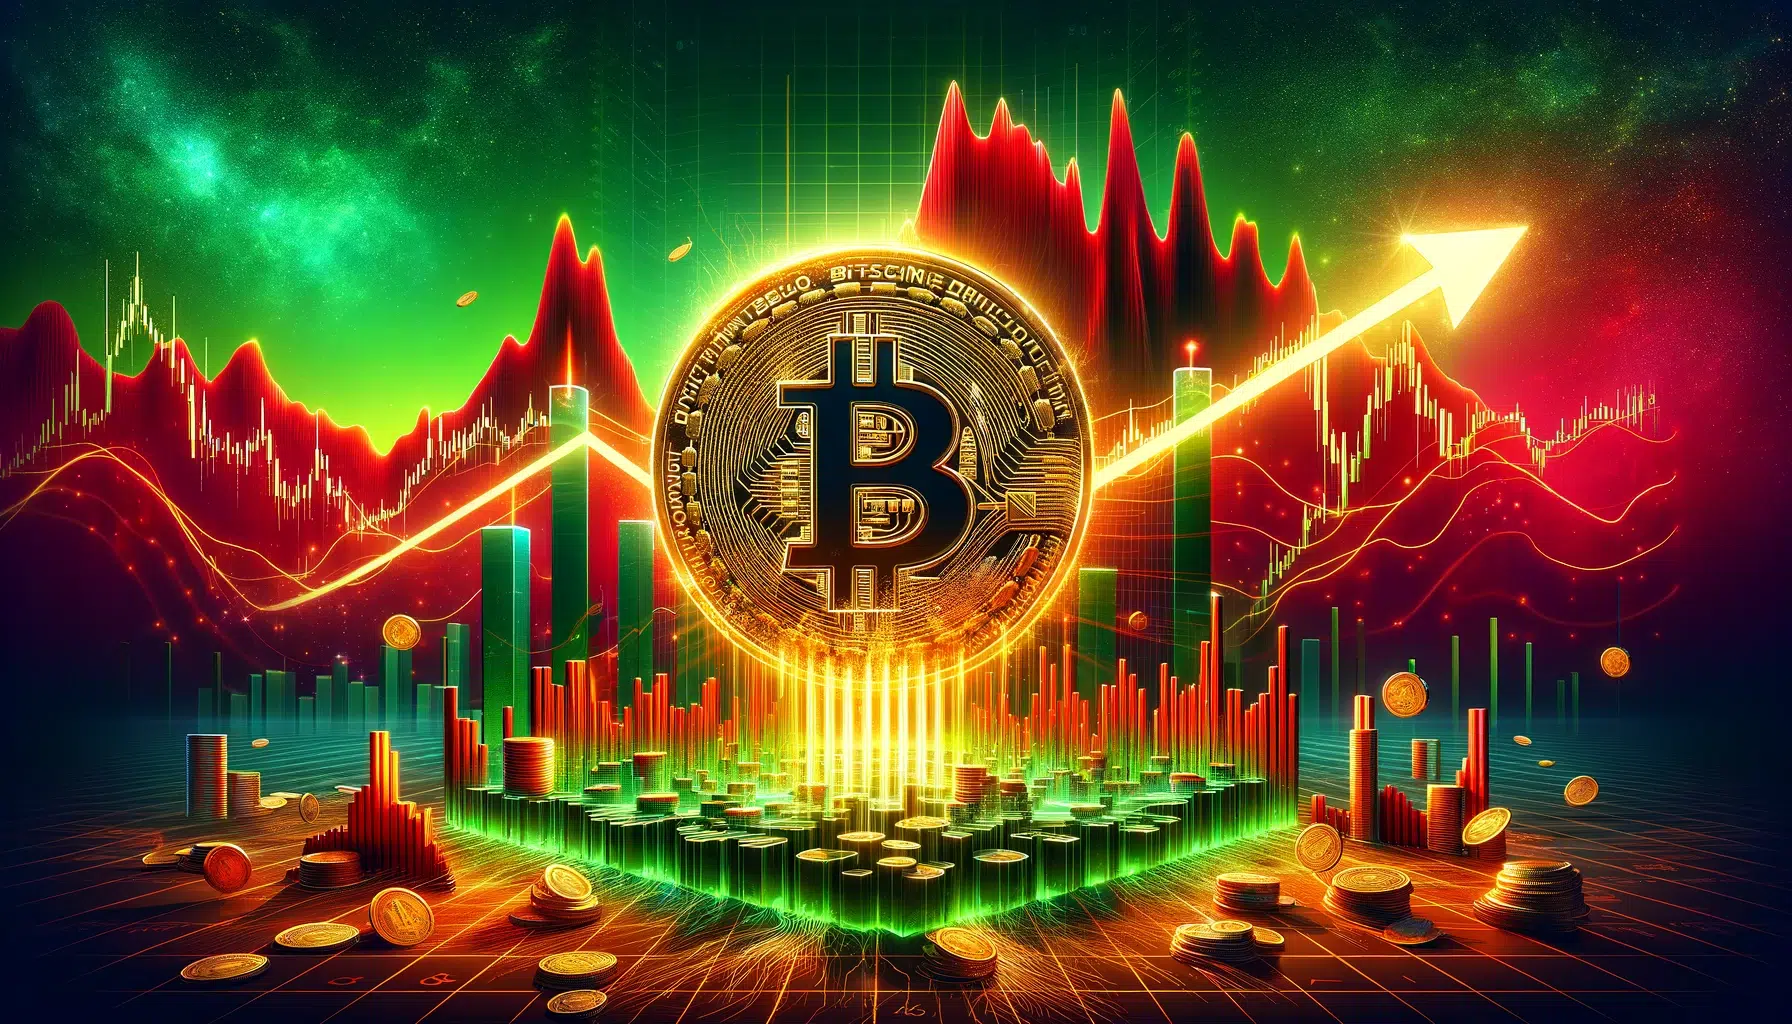 Bitcoin Halving in 2 Days: Will BTC Price Explode to $80,000 or Fall to $40,000?